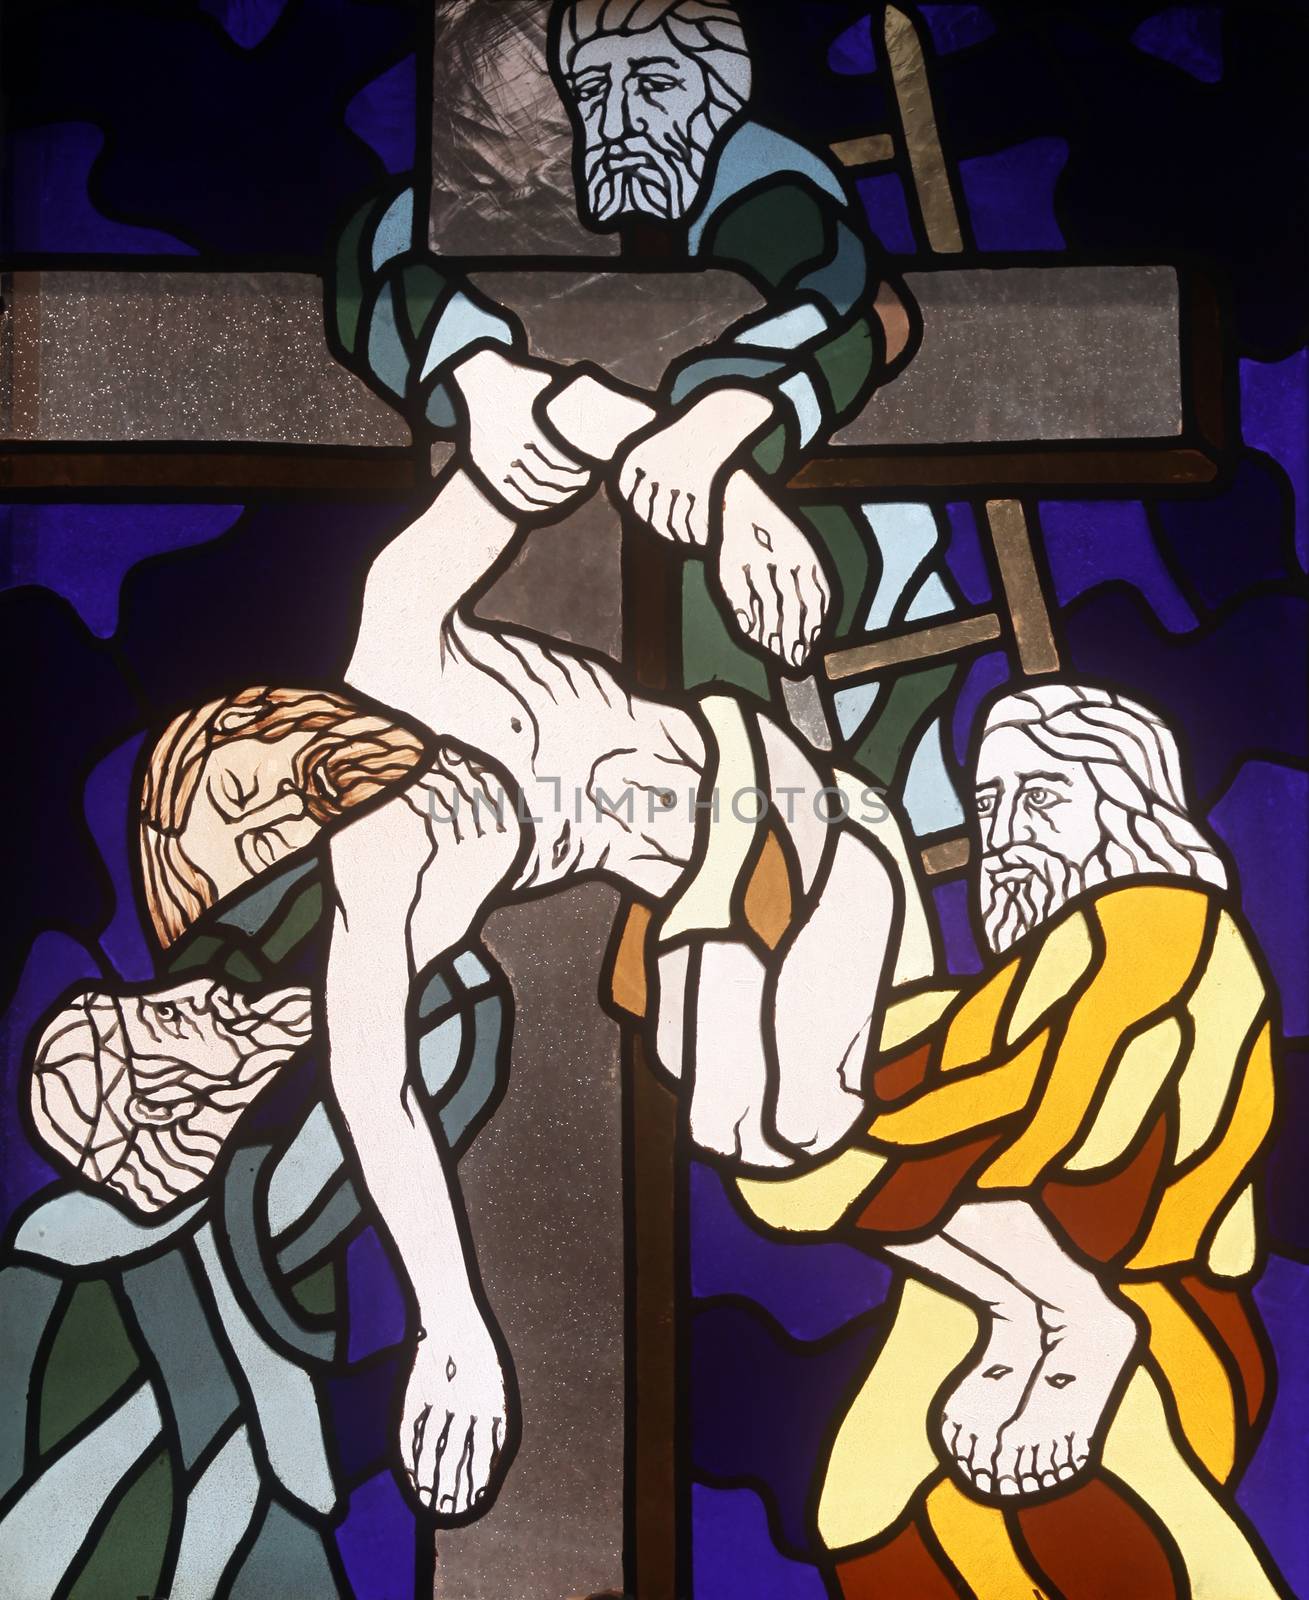 13th Stations of the Cross, Jesus' body is removed from the cross, stained-glass window in the church of St. John the Baptist in Rijeka, Croatia